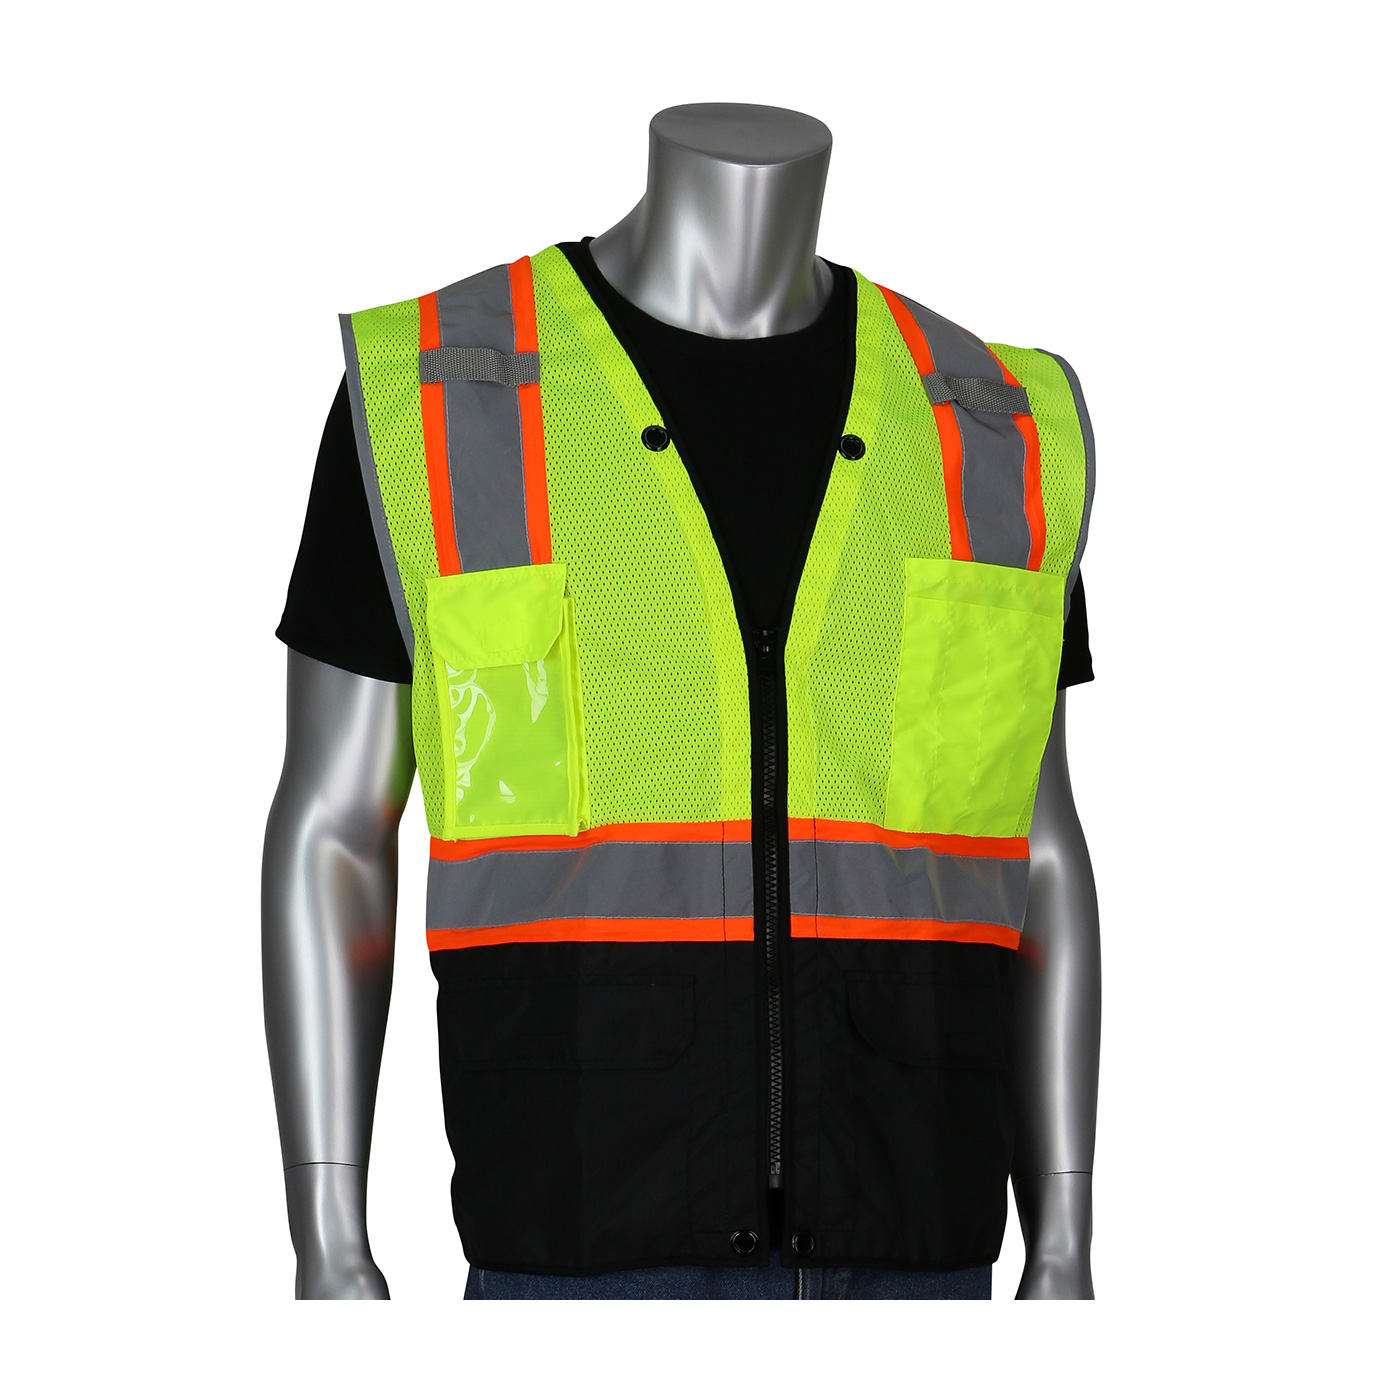 PIP® ANSI Type R Class 2 Hi-Viz Yellow Two-Tone Eleven Pocket Tech-Ready Mesh Surveyors Vest with Ripstop Black Bottom Front and `D` Ring Access #302-0650D